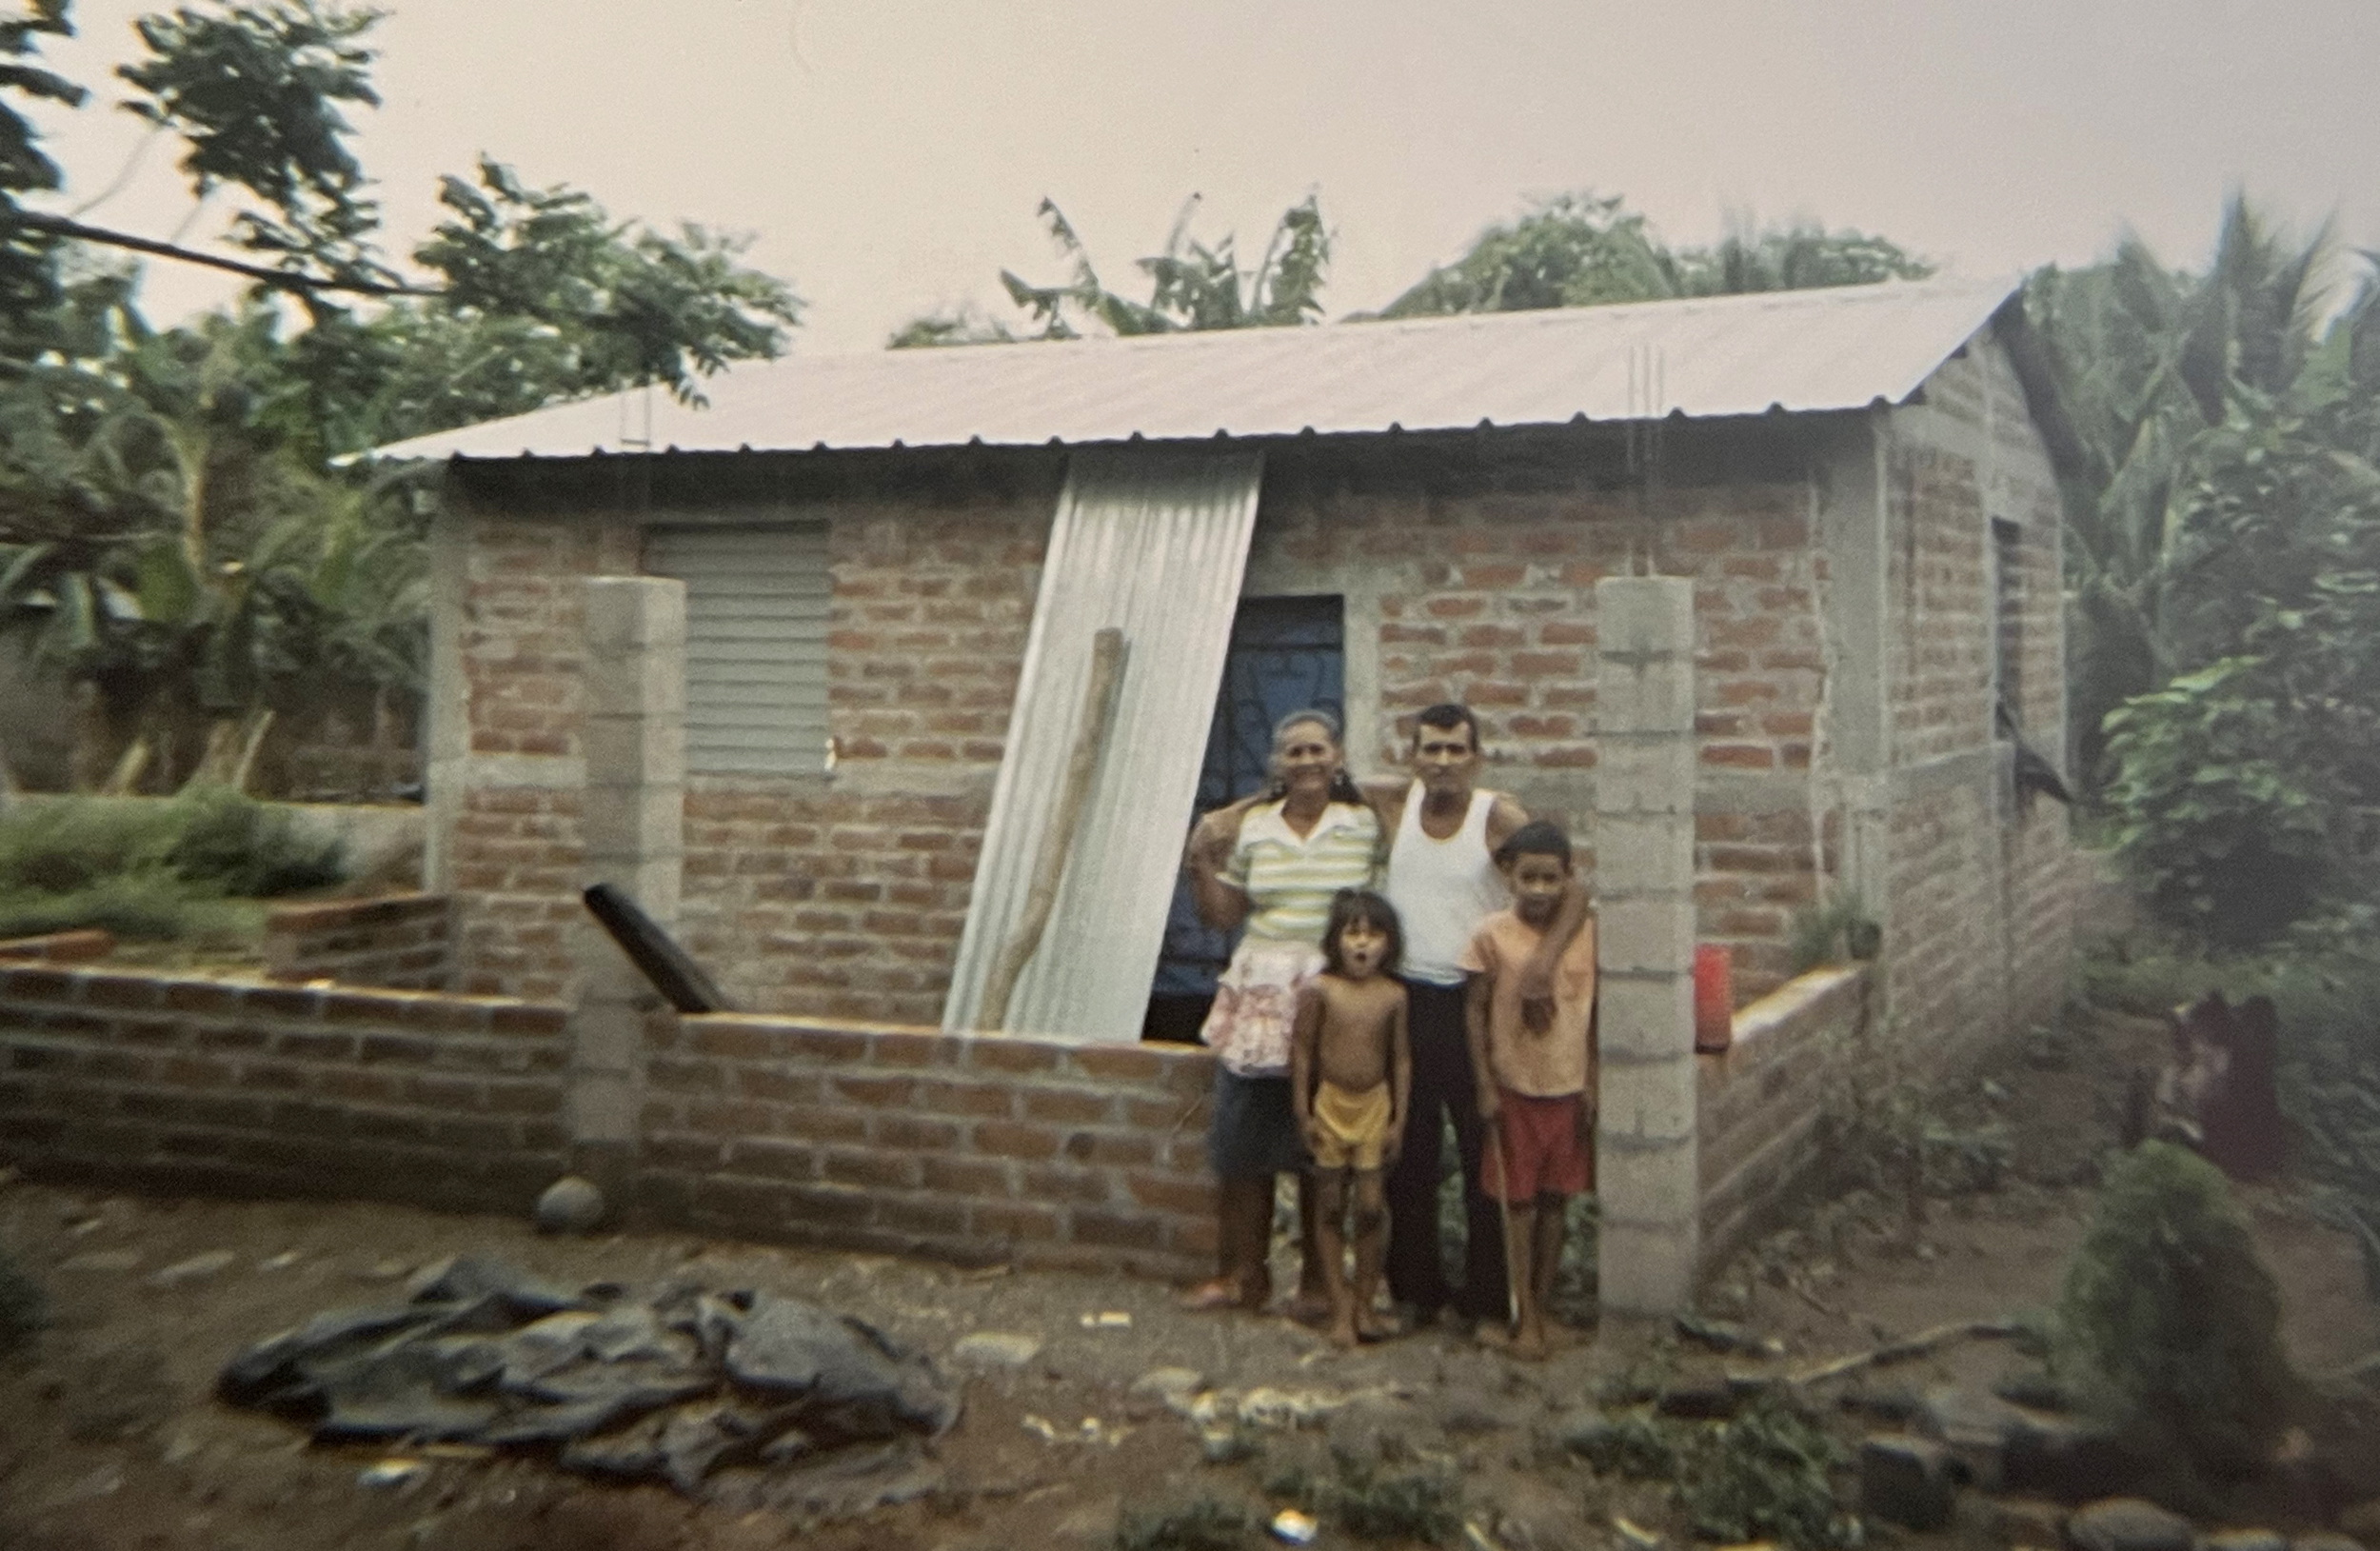 Two adults stand behind and embrace two children as they all pose in front of a brick house surrounded by trees.